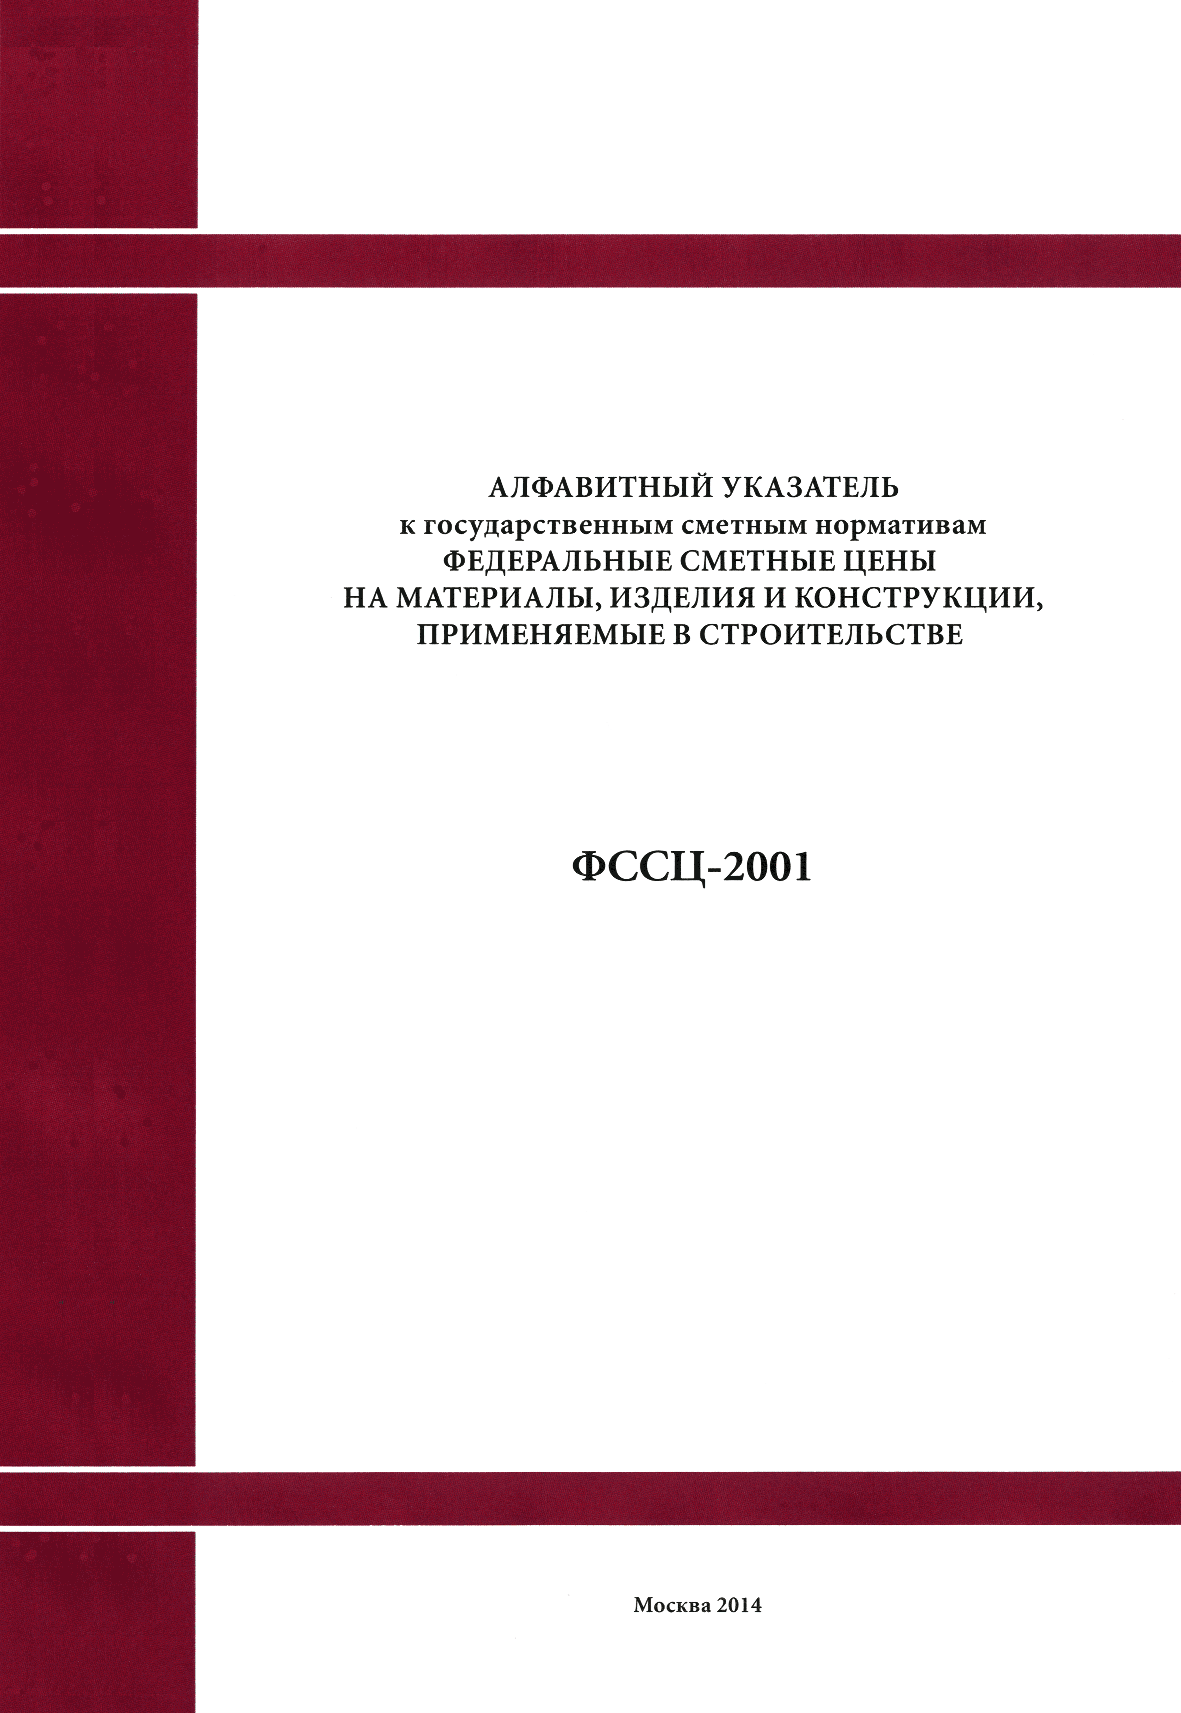 ФССЦ 2001